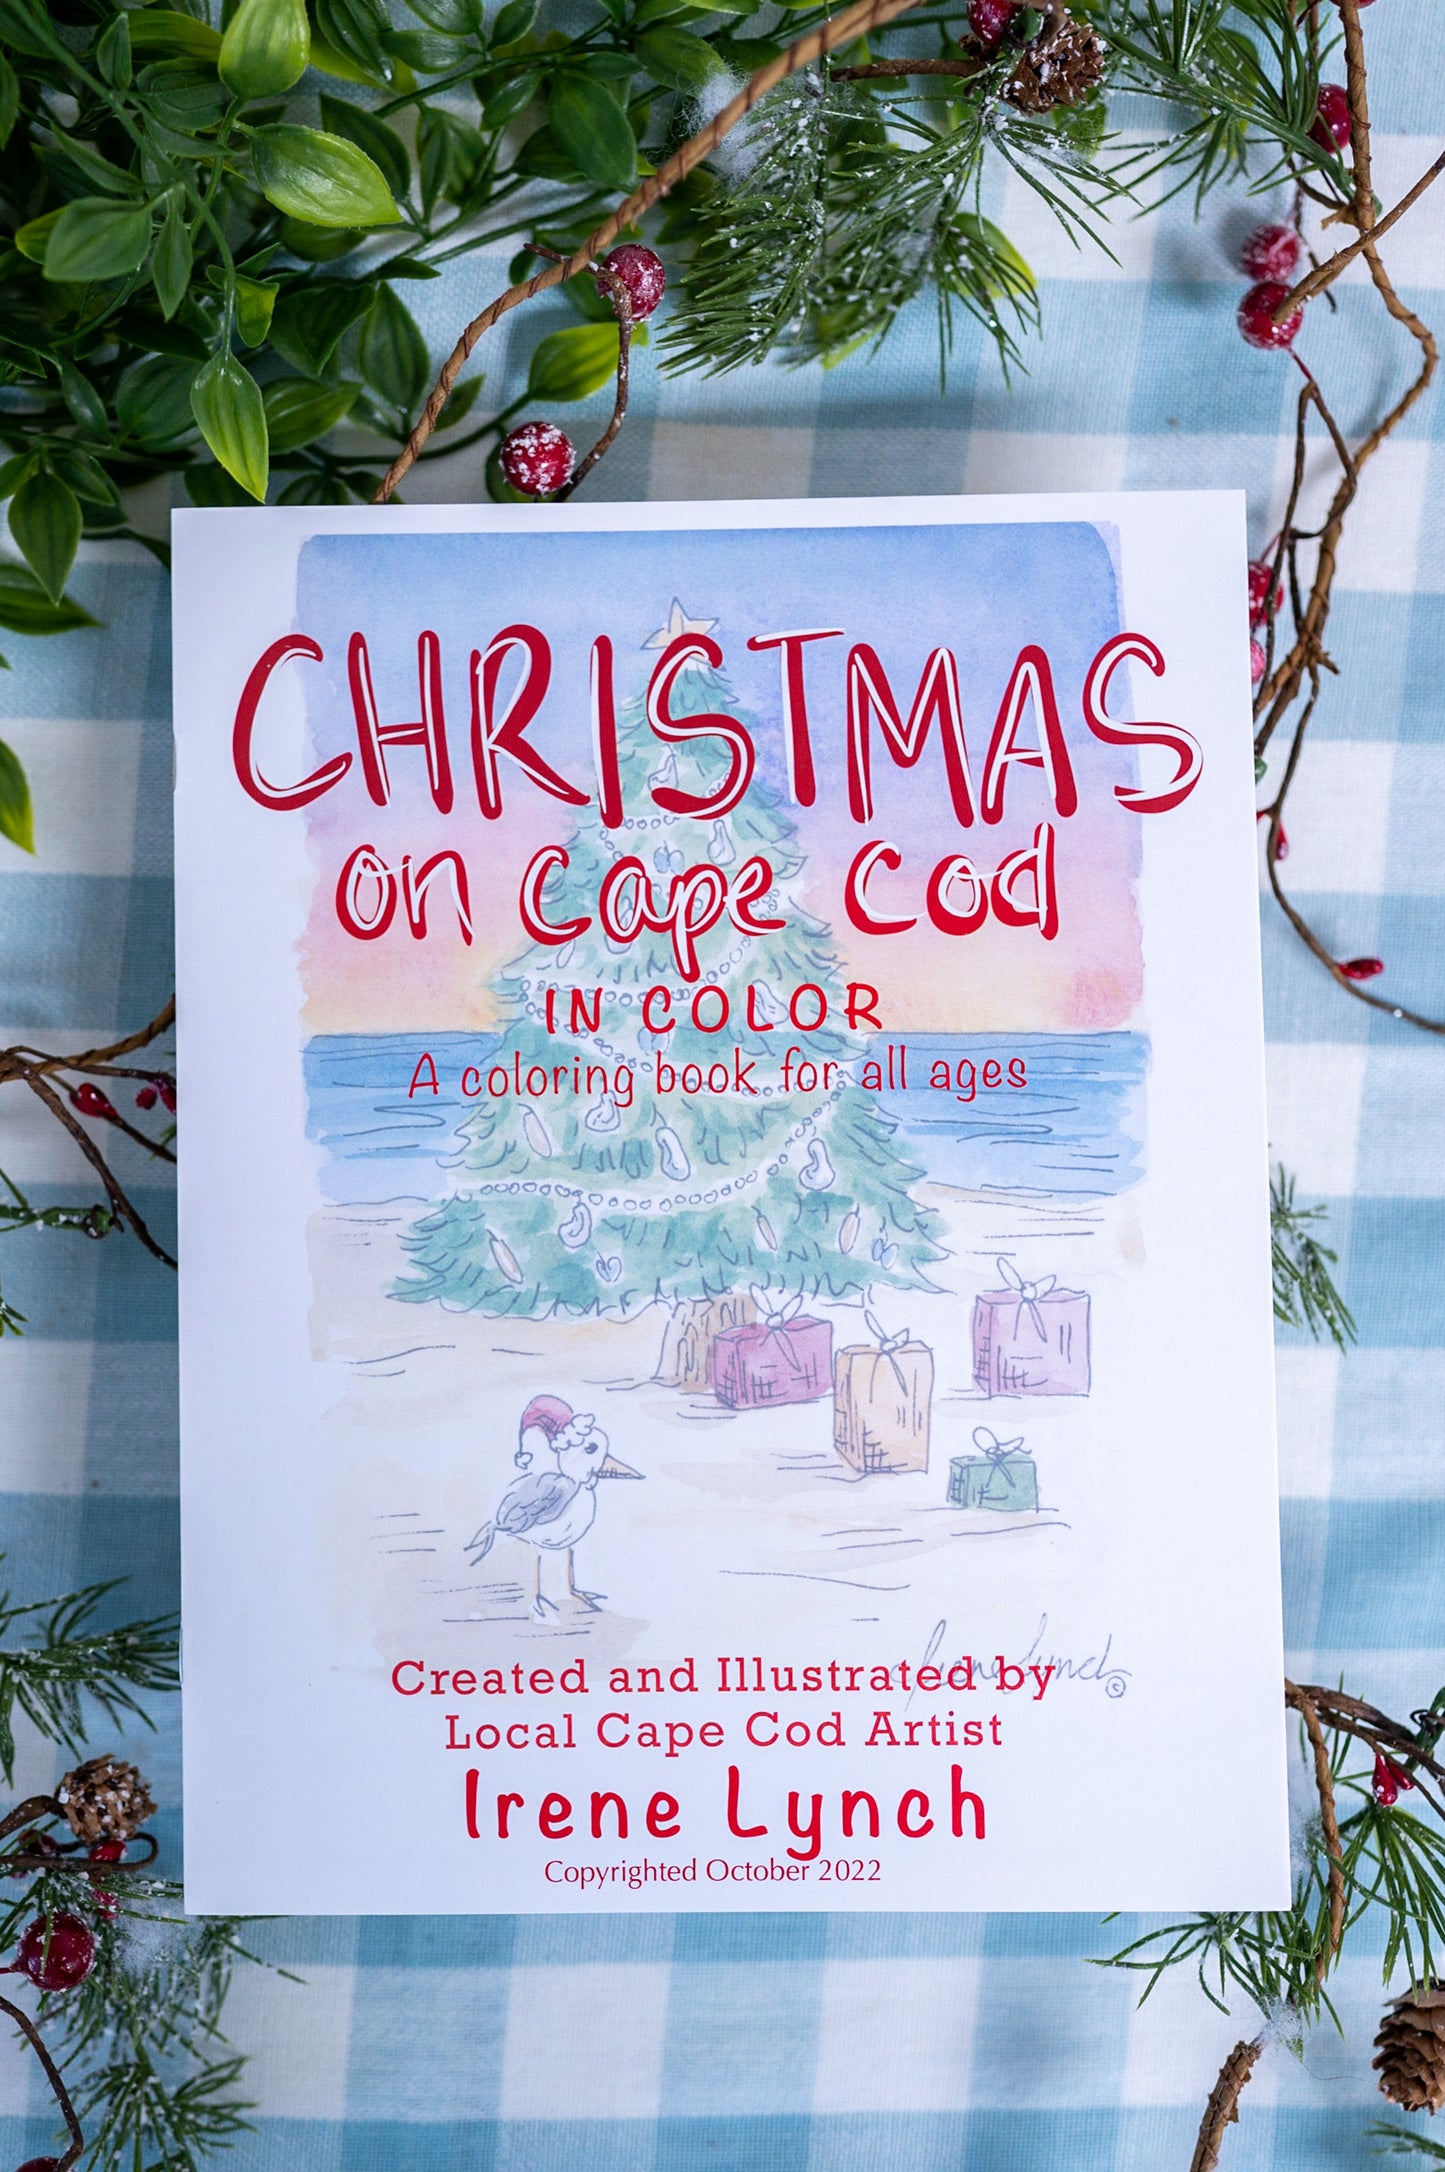 "Christmas on Cape Cod in Color" A Coloring Book For All Ages - Wholesale